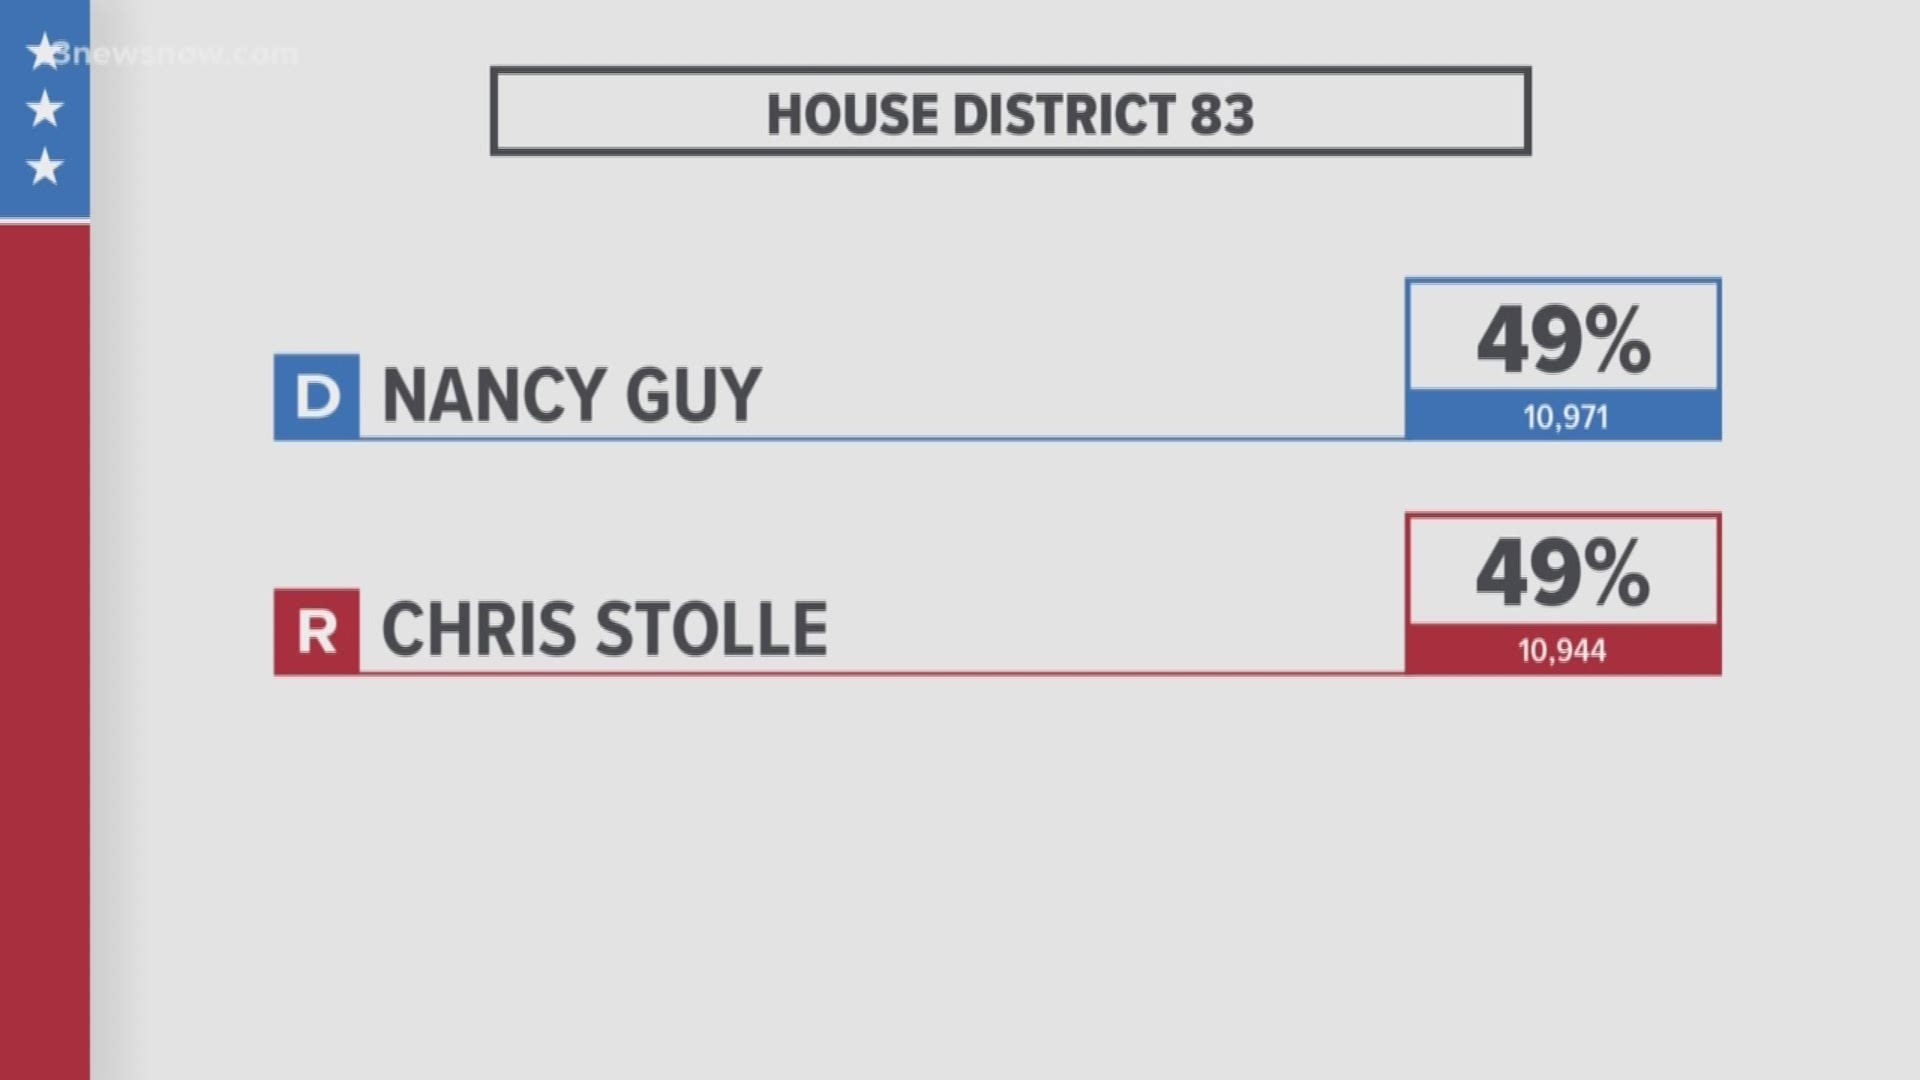 A delegate followed through with his plans to ask for a recount after a tight election race. Chris Stolle asked for a recount after he had 27 votes behind Nancy Guy.